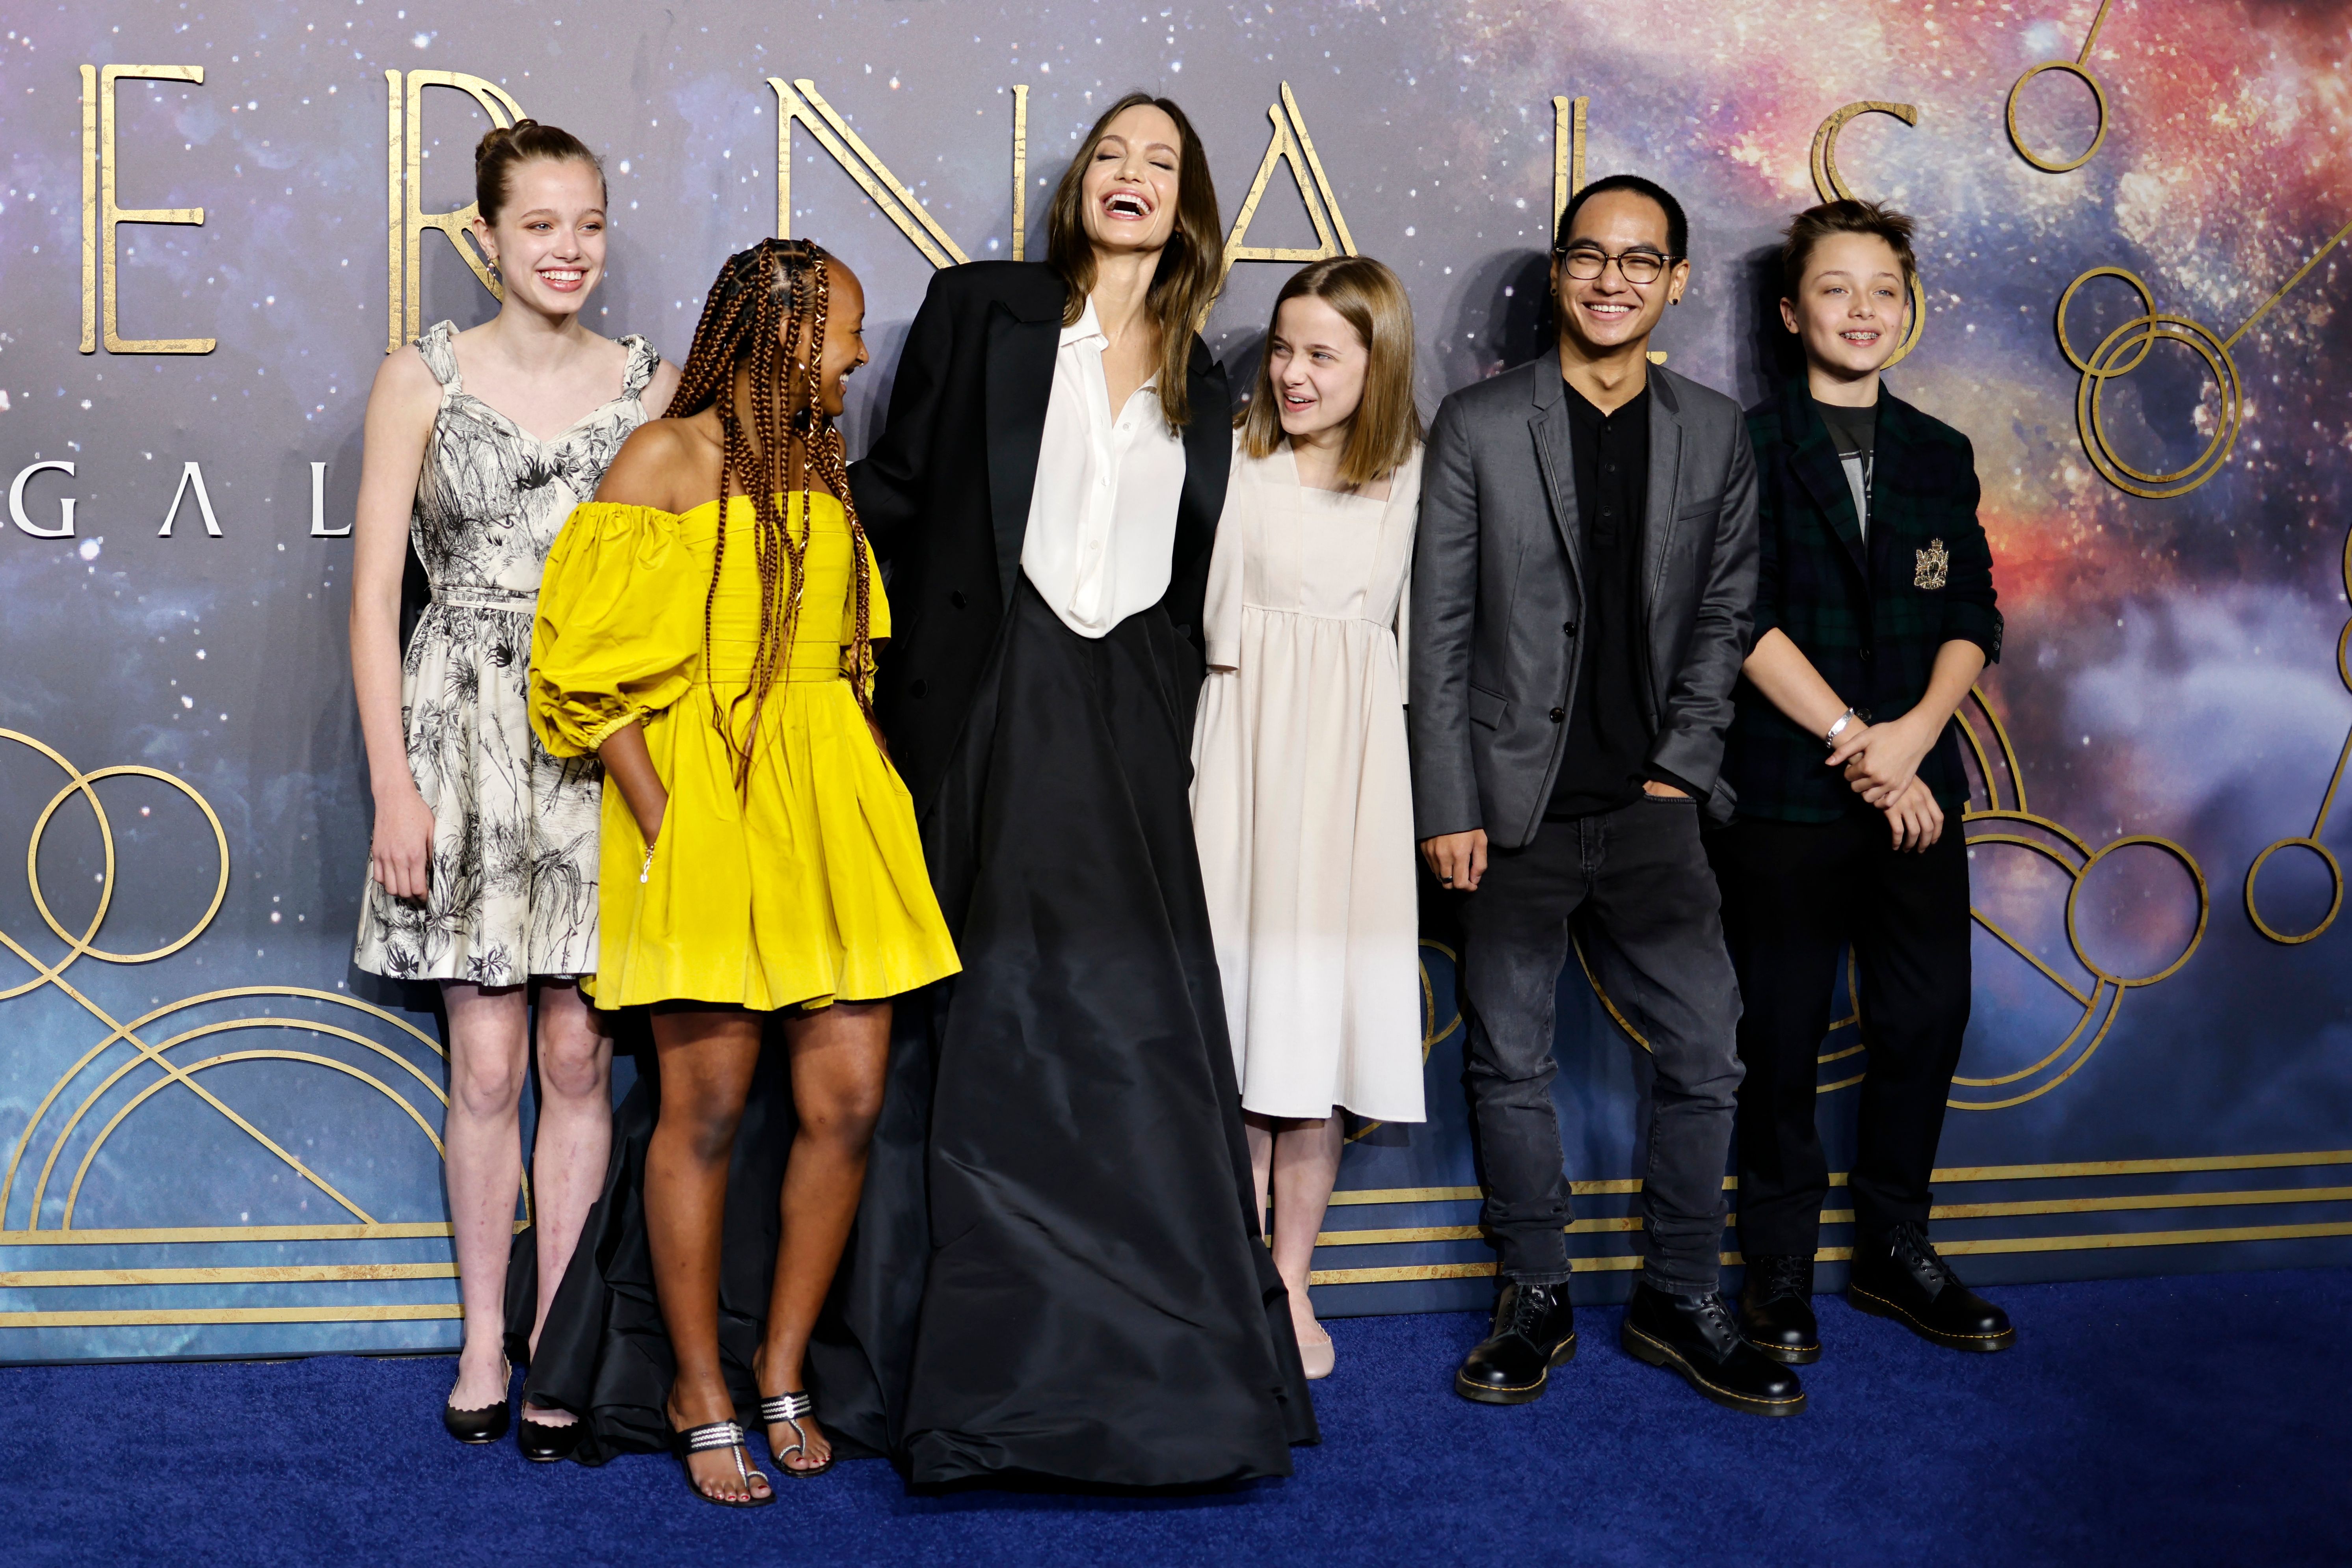 Angelina Jolie with her children Knox, Vivienne, Shiloh, Zahara and Maddox at "Eternals" screening in London in 2021 | Source: Getty Images